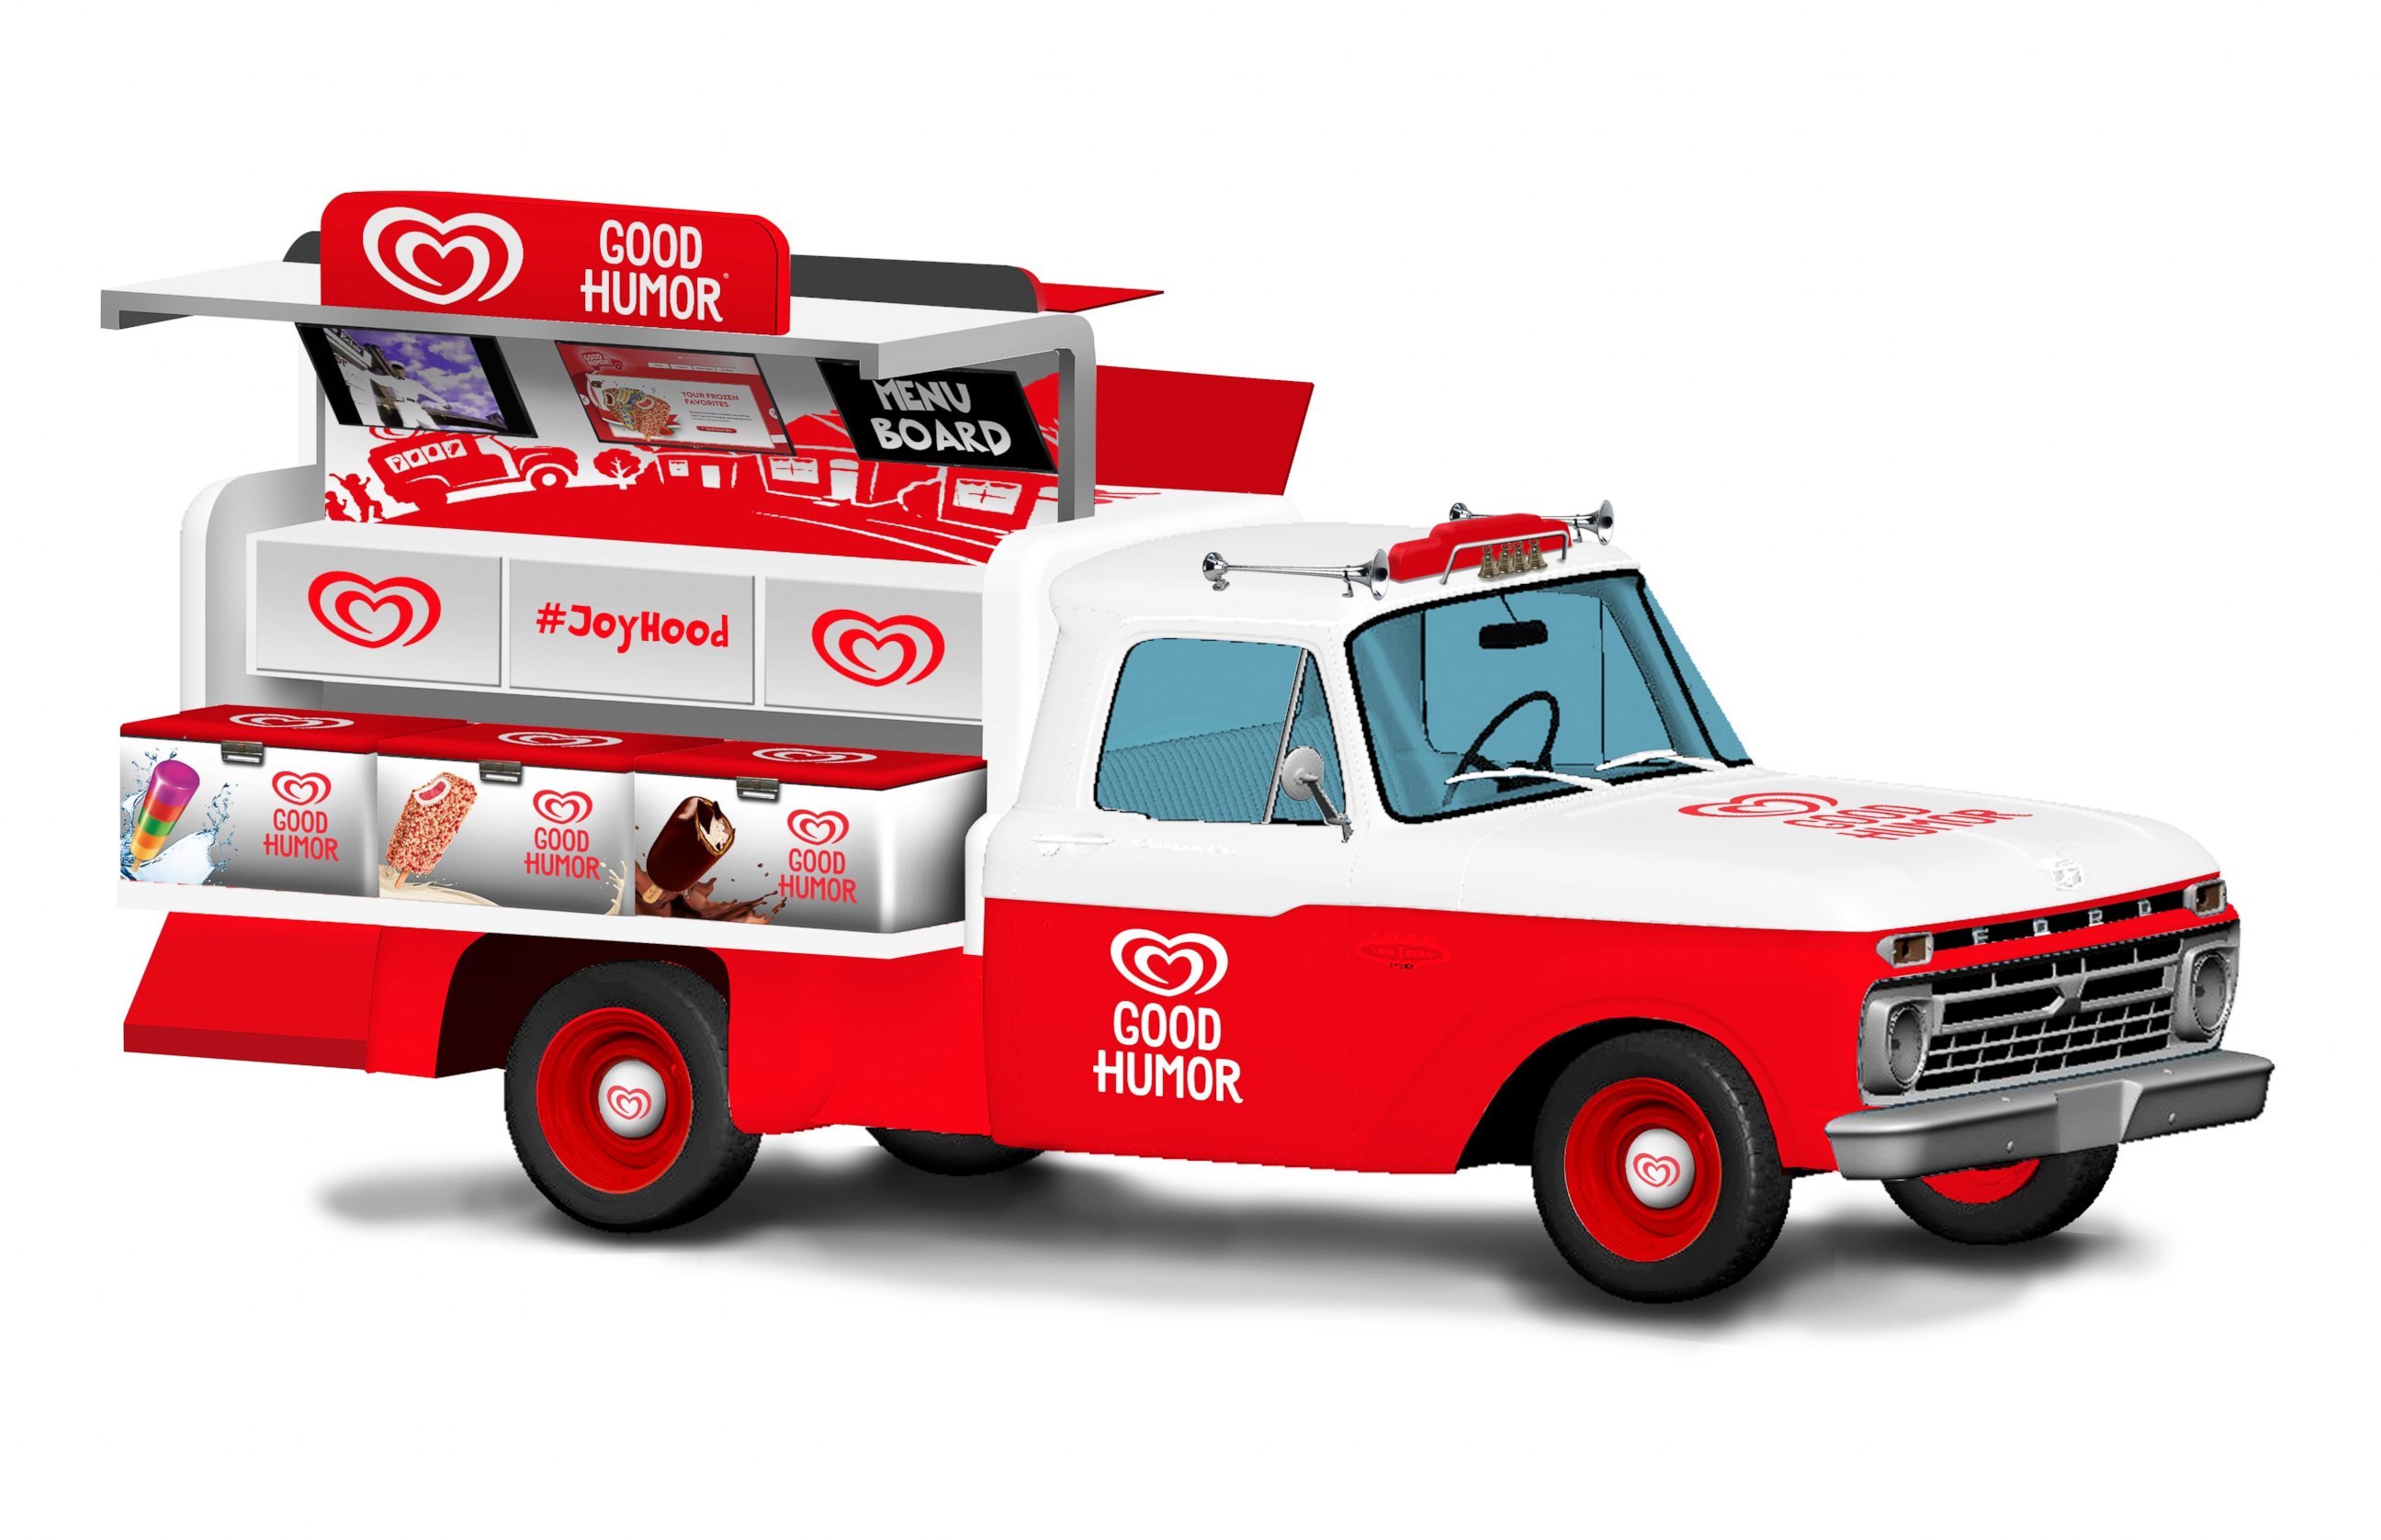 PHOTO: A rendering of the updated Good Humor truck touring the Northeast this summer.